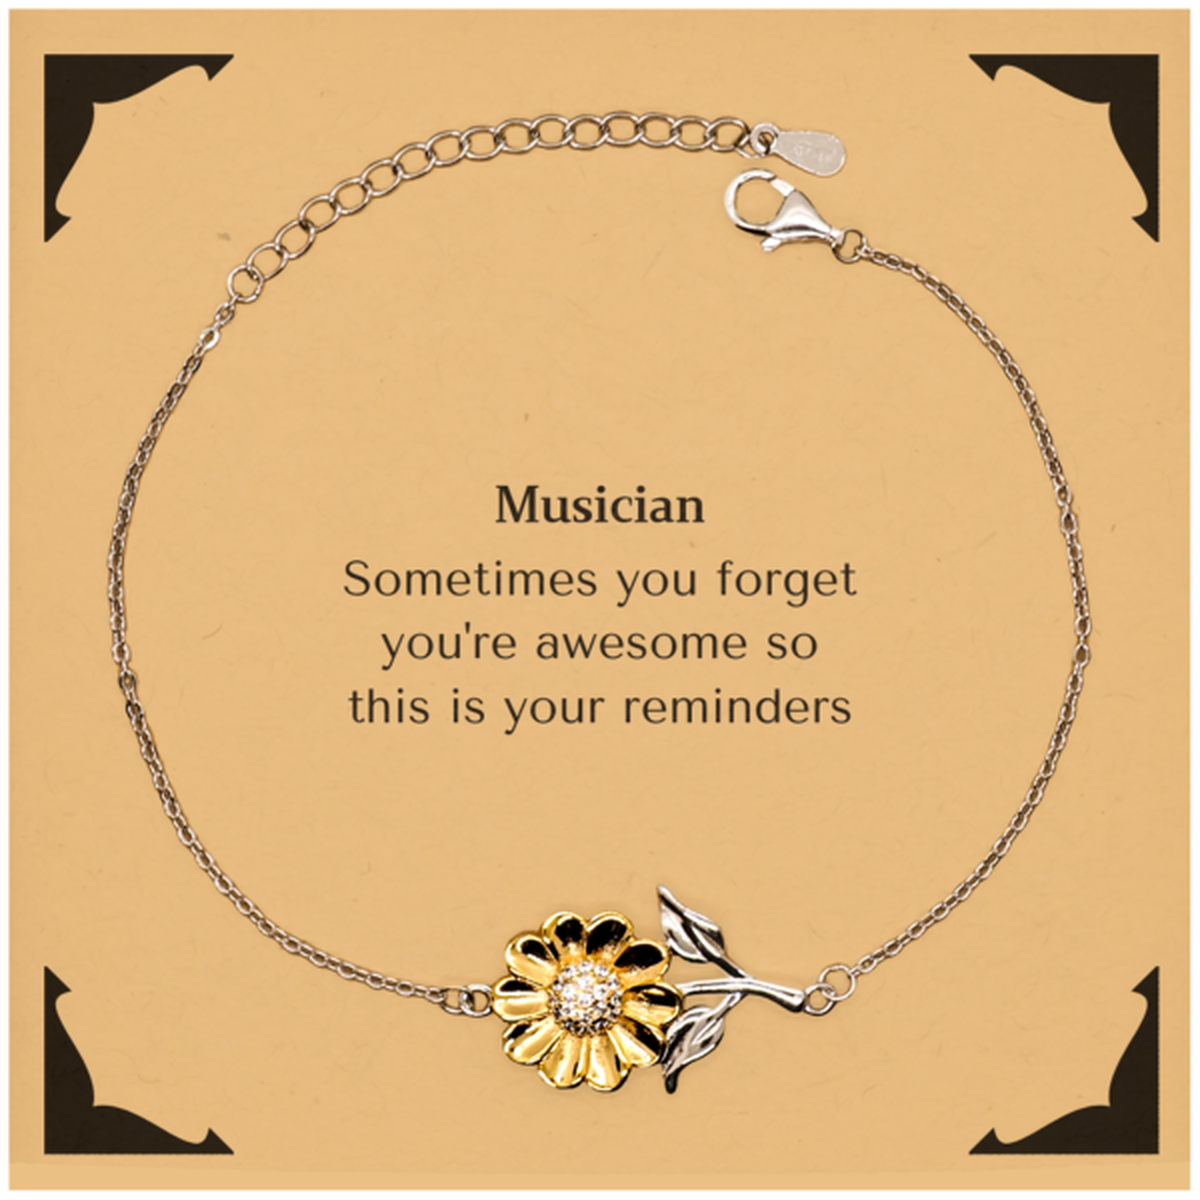 Sentimental Musician Sunflower Bracelet, Musician Sometimes you forget you're awesome so this is your reminders, Graduation Christmas Birthday Gifts for Musician, Men, Women, Coworkers